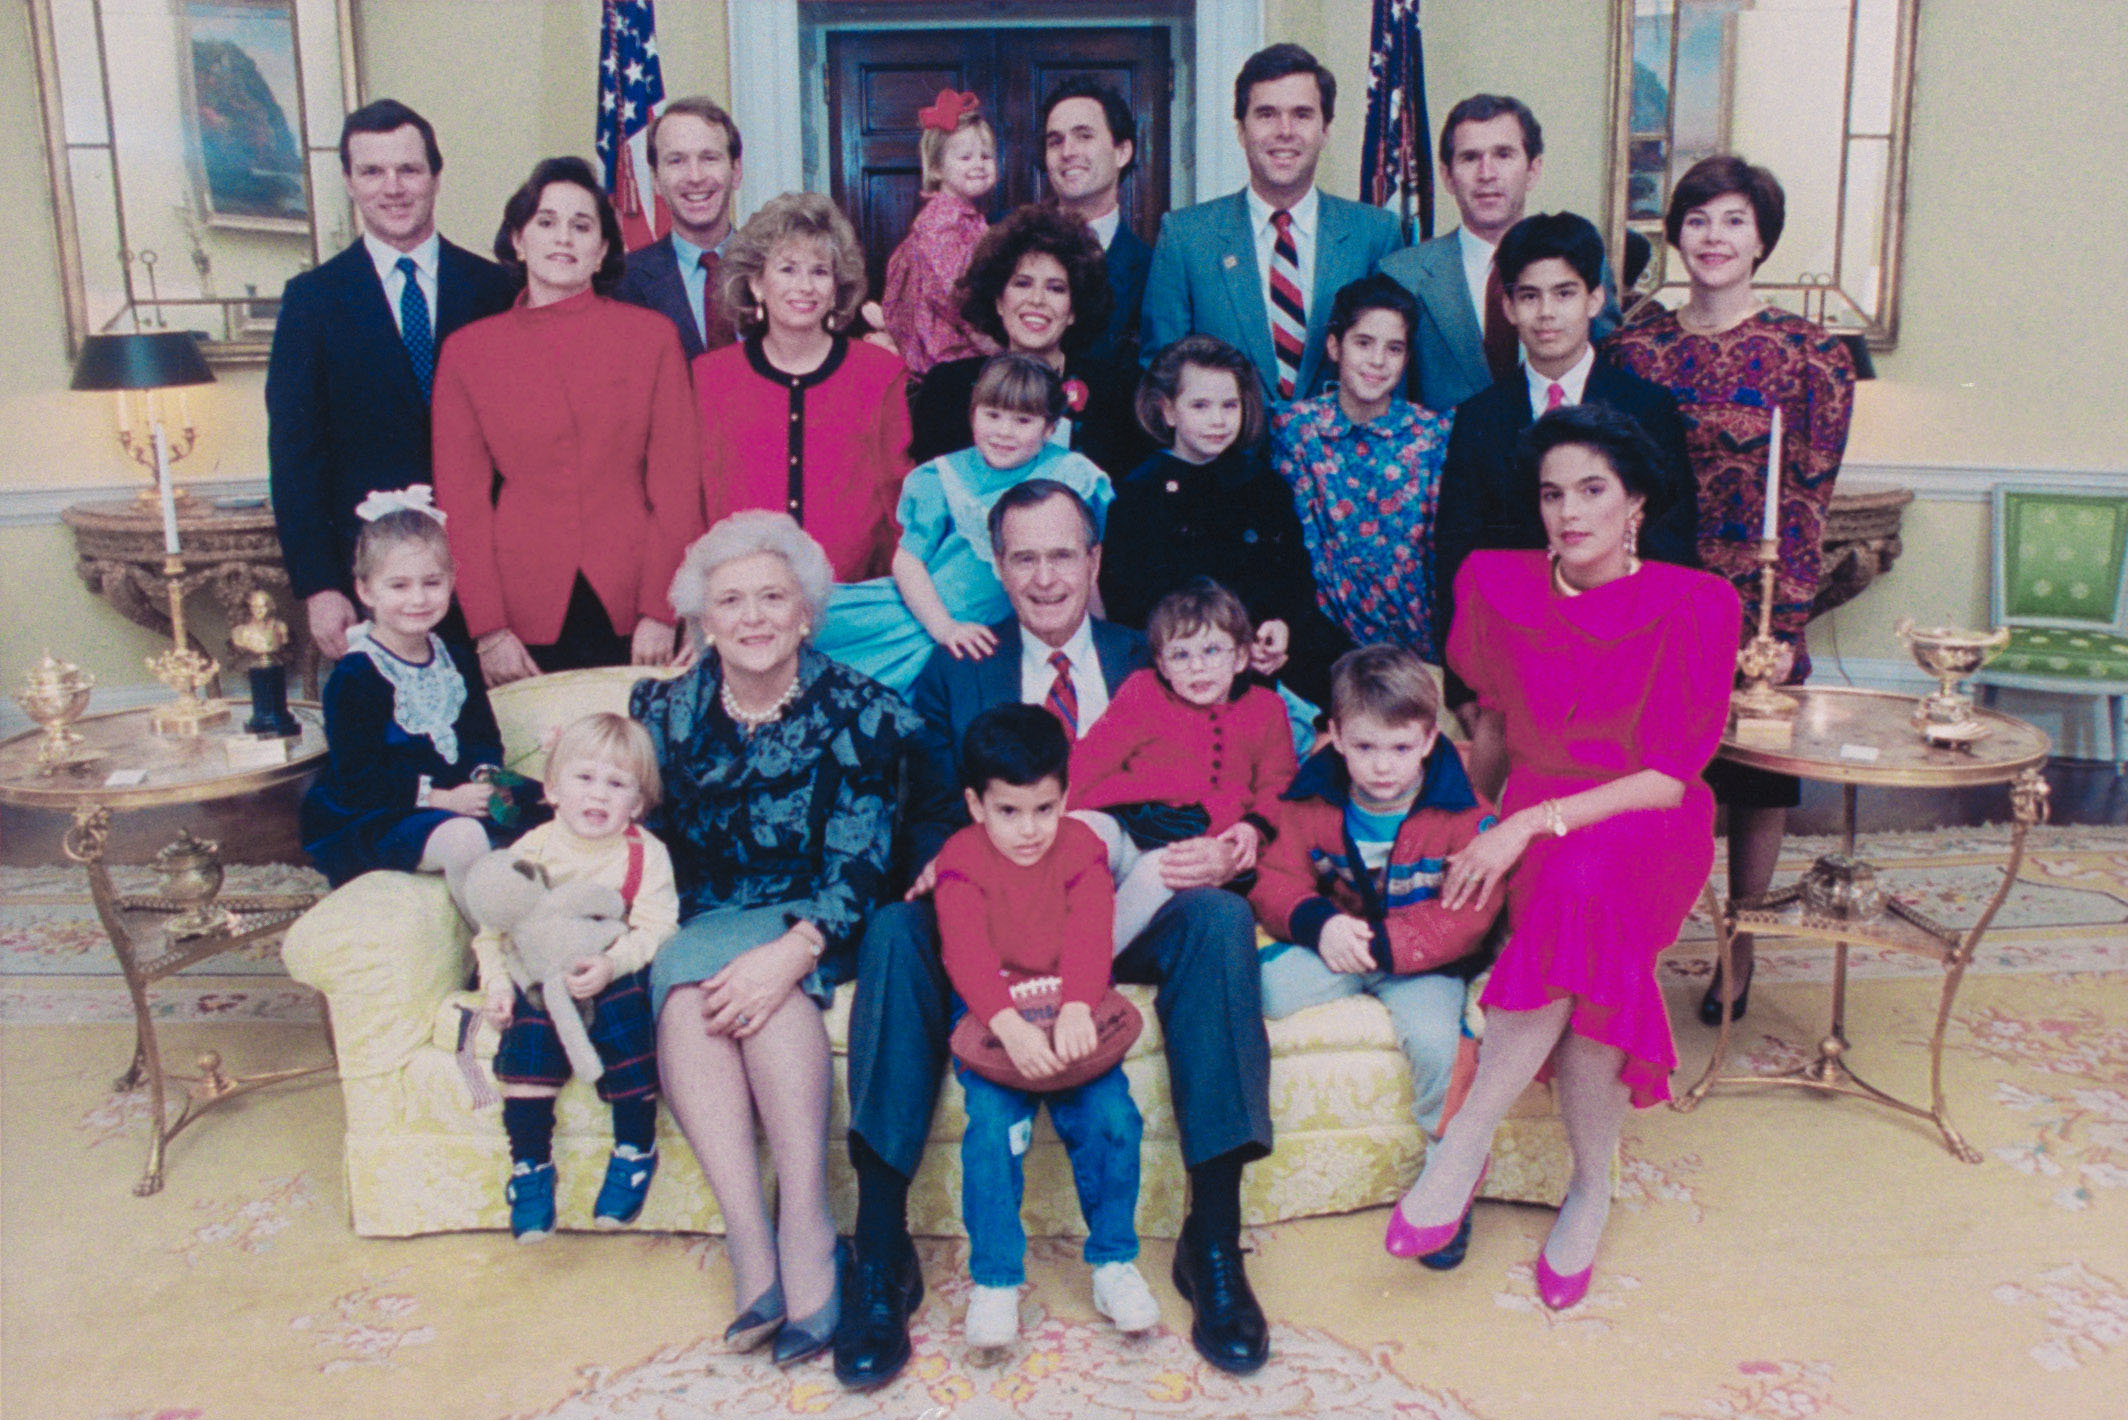 PHOTO: Pictured is the President George H.W. Bush family in the White House in Washington D.C. on Jan. 21, 1989. George P. Bush is pictured in the center row, to the right. 